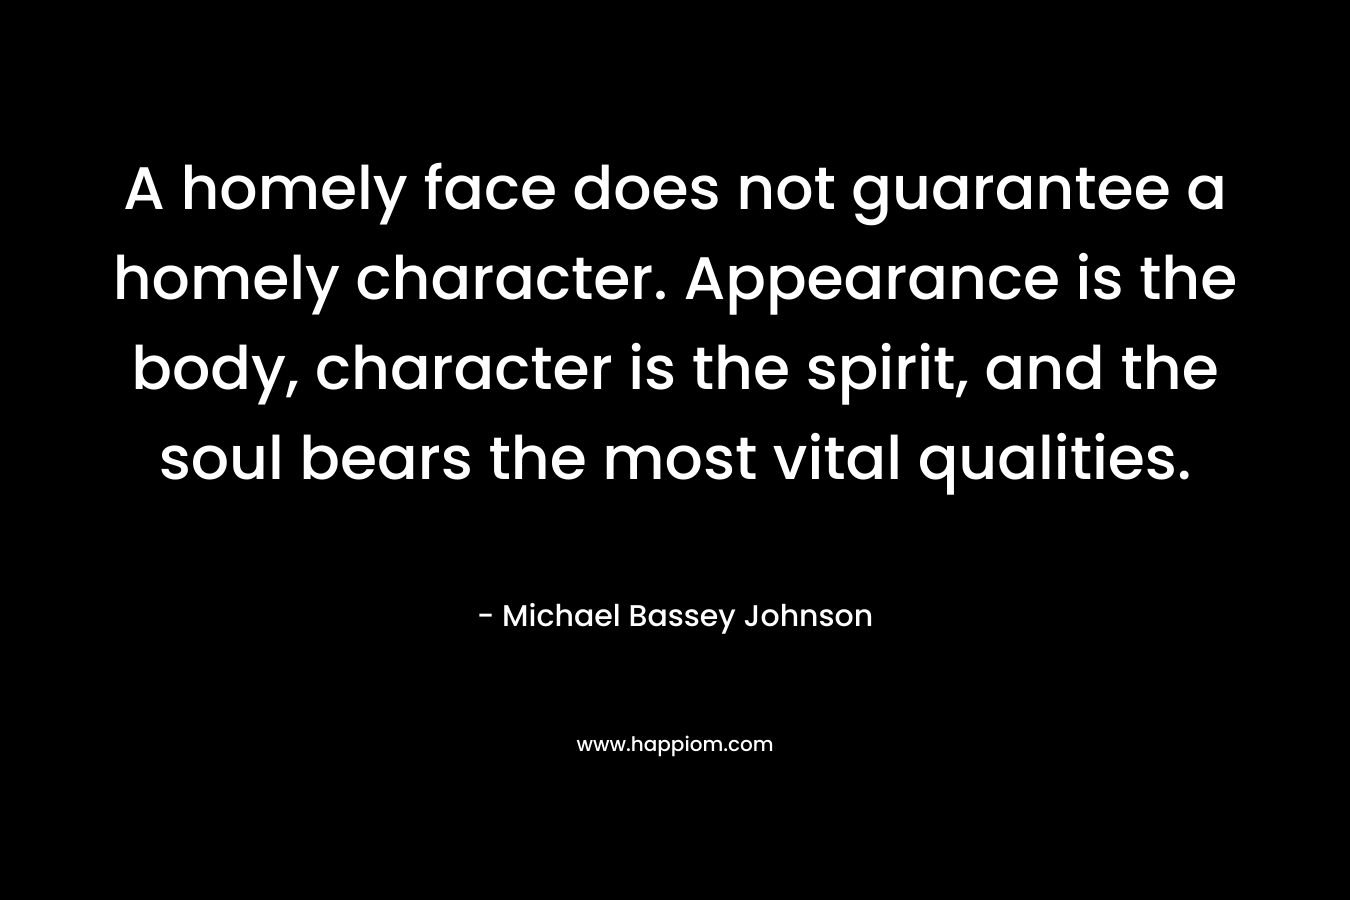 A homely face does not guarantee a homely character. Appearance is the body, character is the spirit, and the soul bears the most vital qualities.